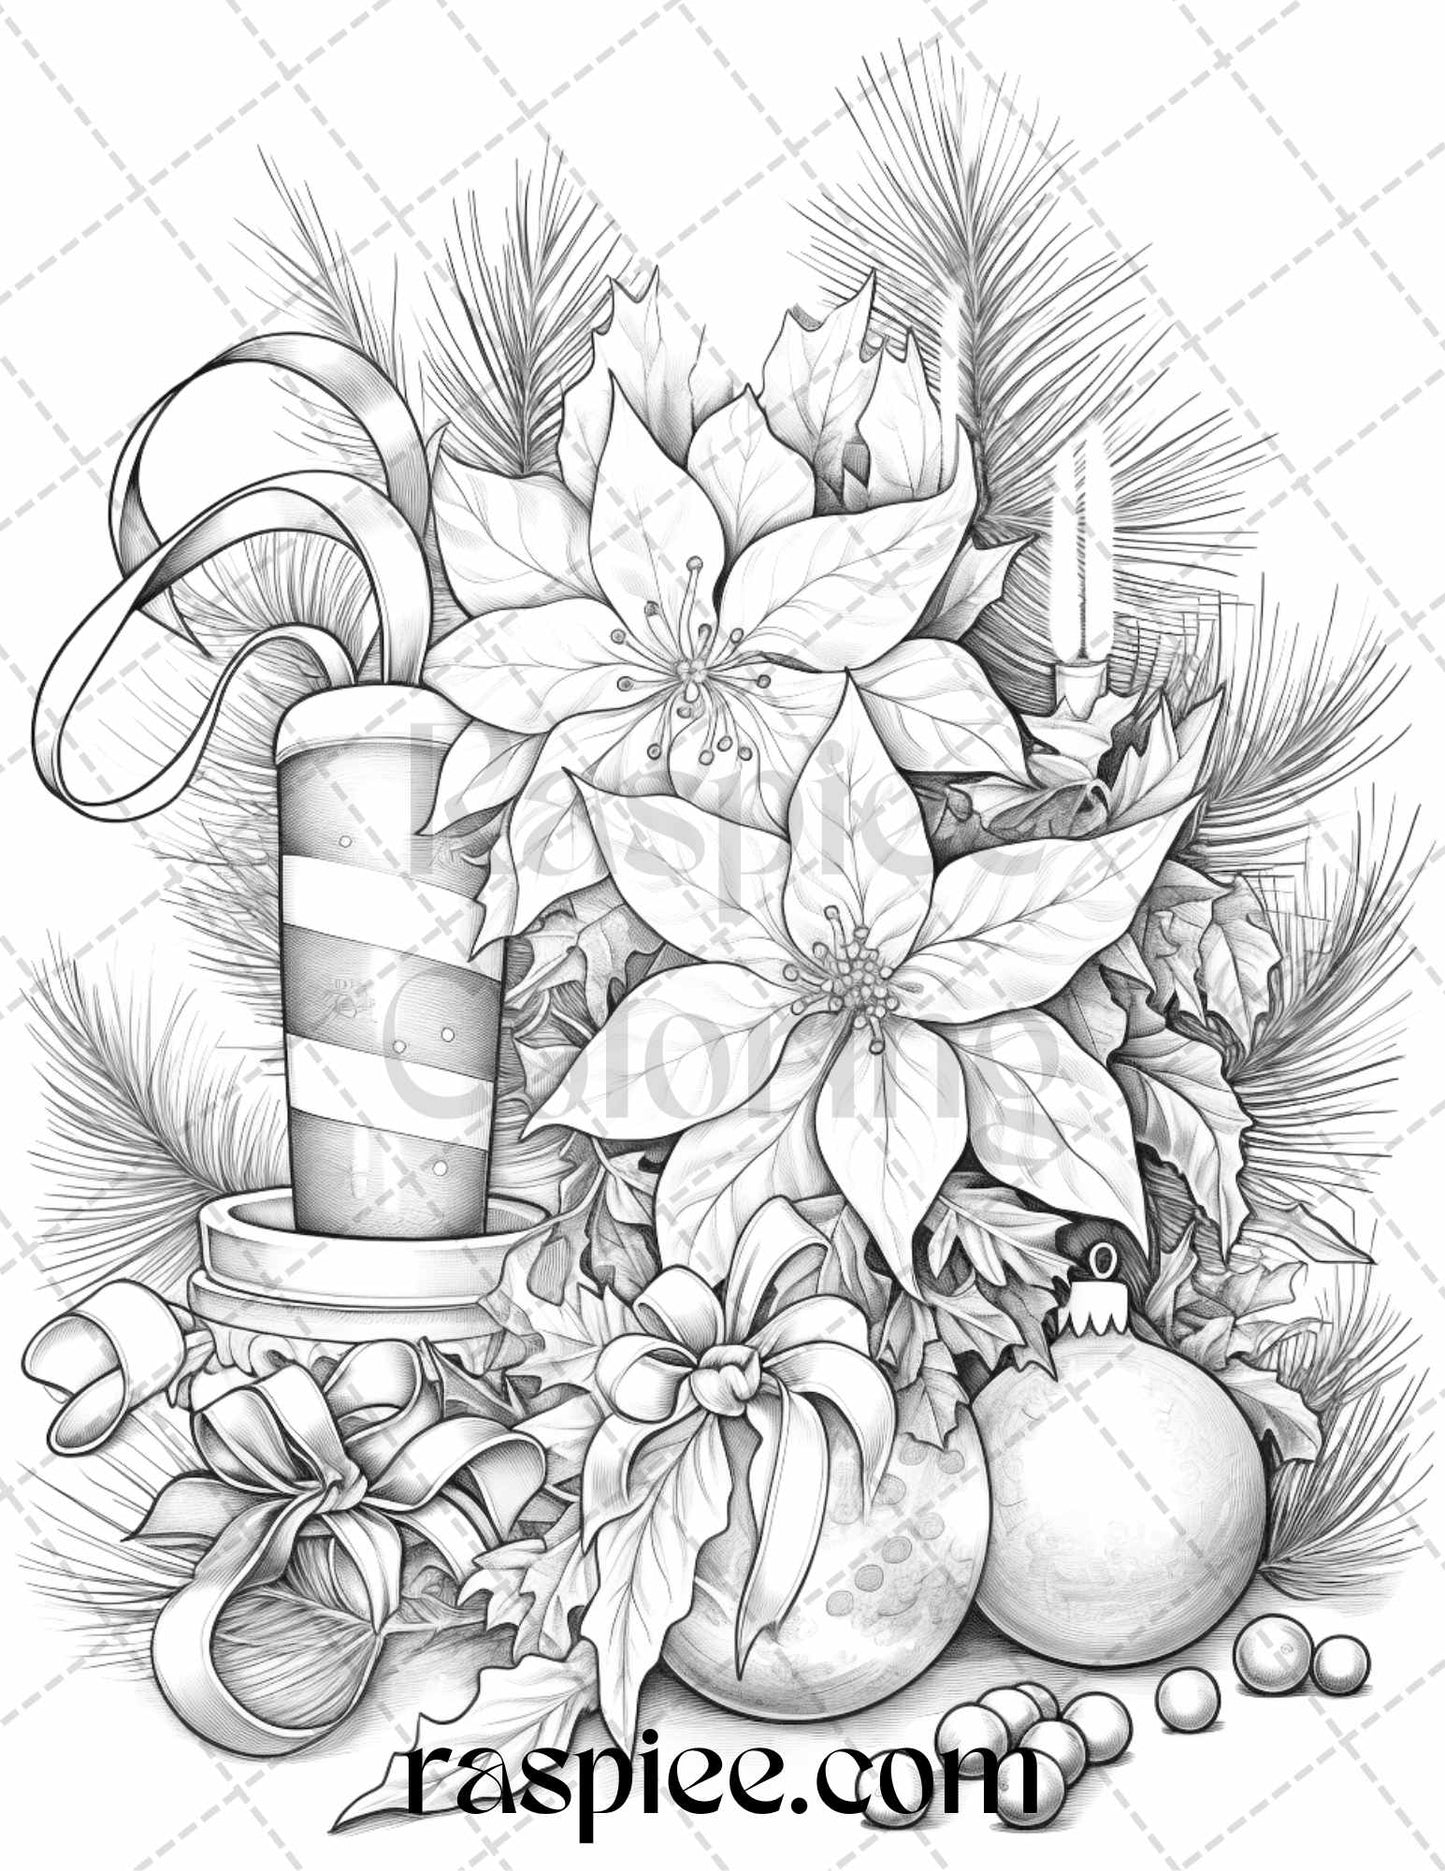 45 Christmas Flowers Grayscale Coloring Pages Printable for Adults, PDF File Instant Download